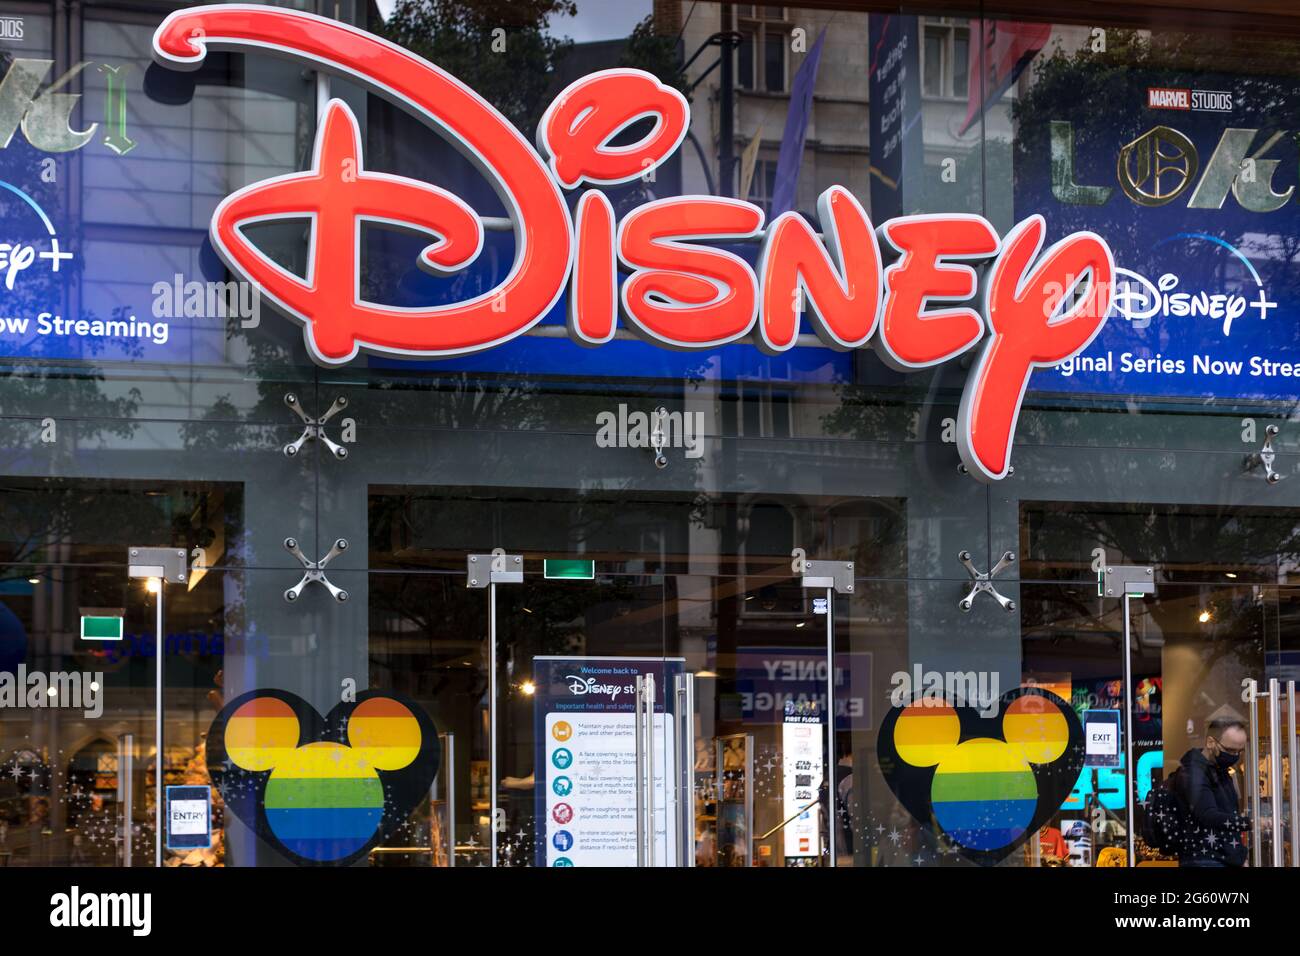 London Uk 23rd June 21 Disney Store Windows Seen Decorated With Rainbow Colors At The Oxford Circus In London June Is Traditionally Pride Month In The Uk In Celebration Of The Pride Movement